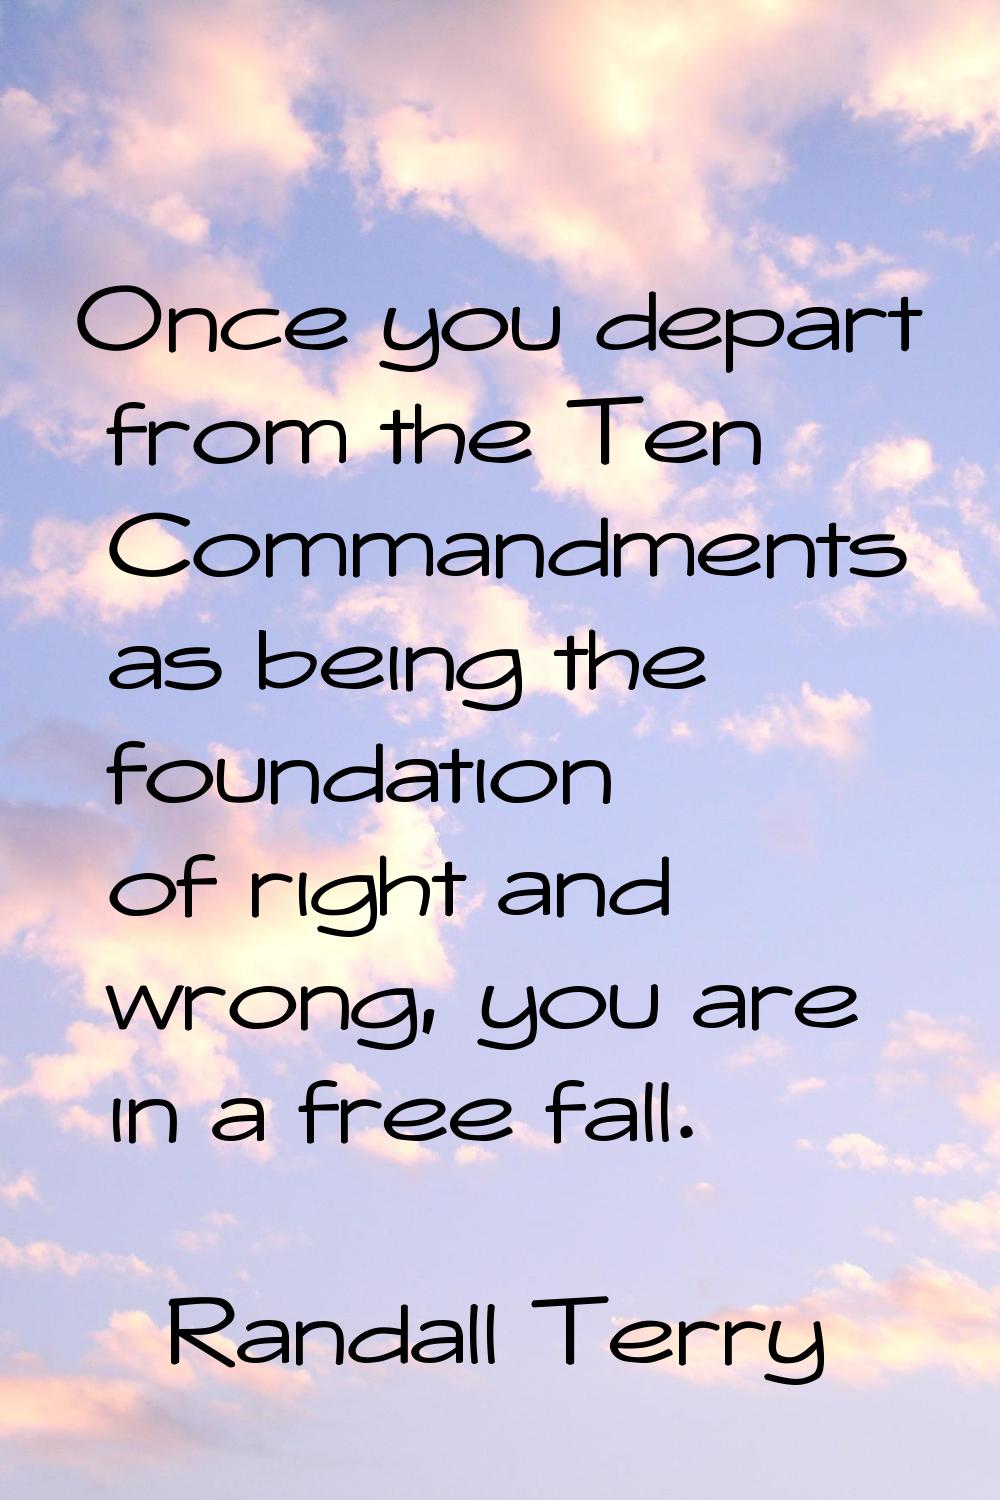 Once you depart from the Ten Commandments as being the foundation of right and wrong, you are in a 